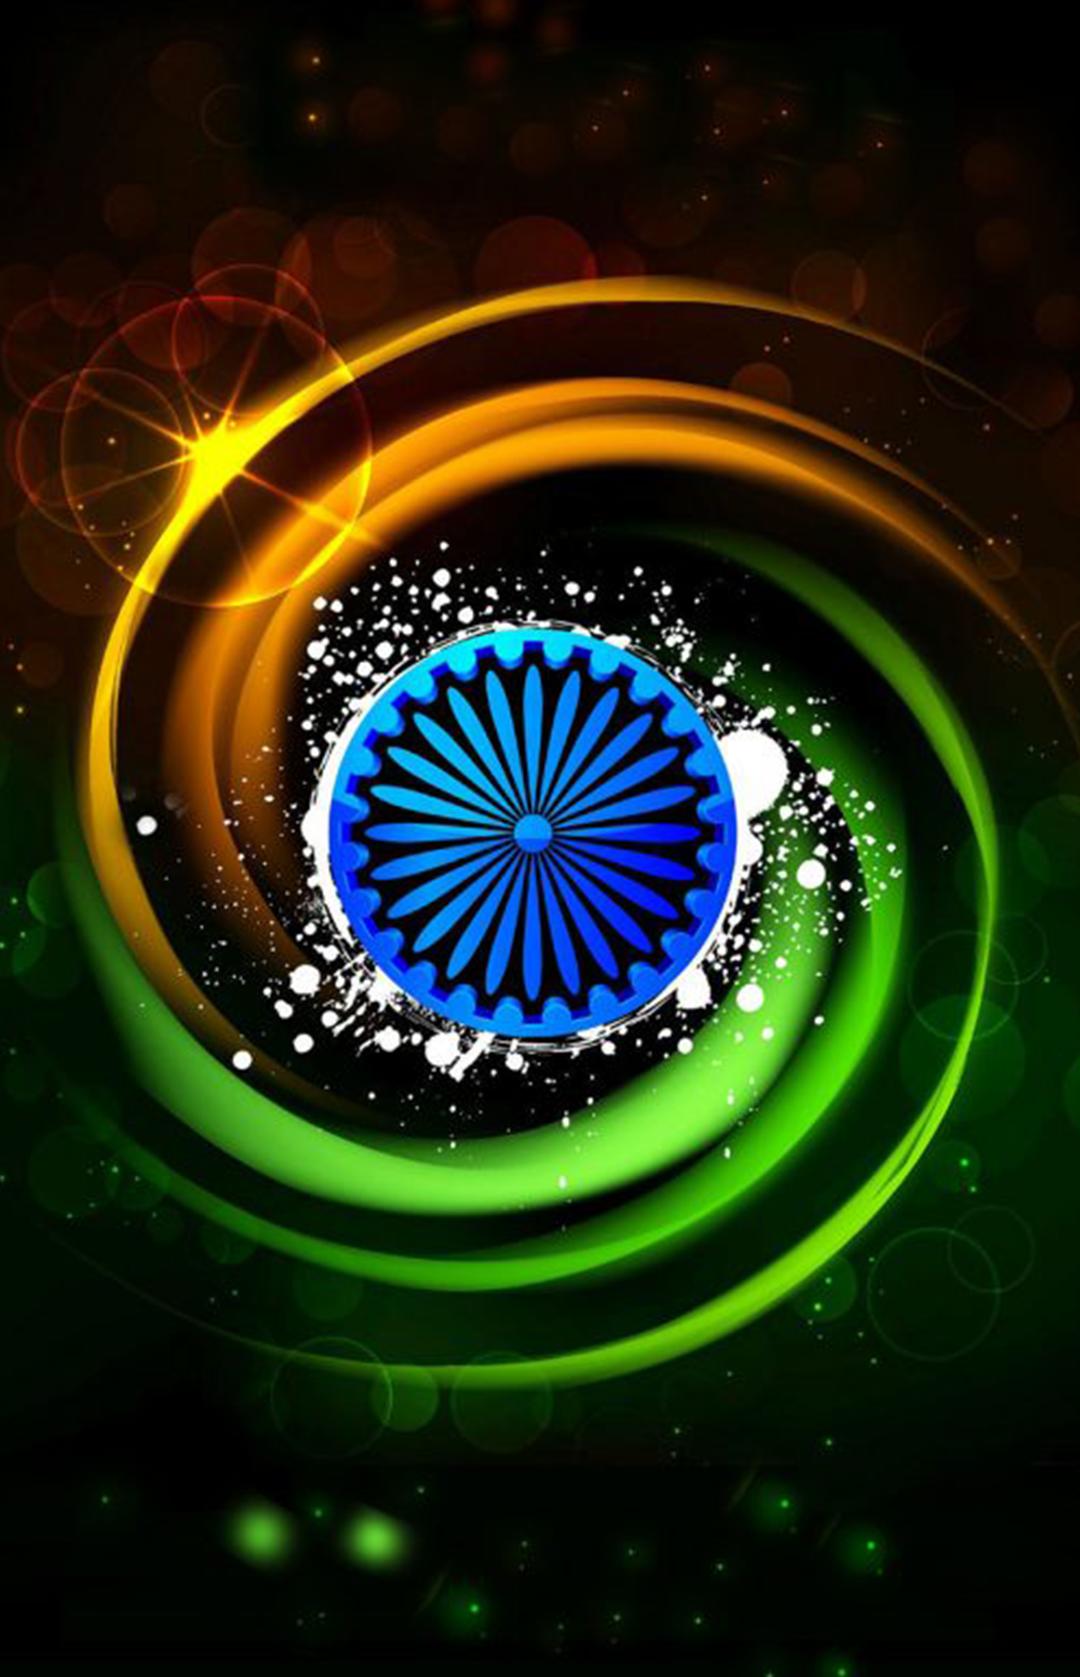 Republic Day HD Wallpaper 2019 for Android